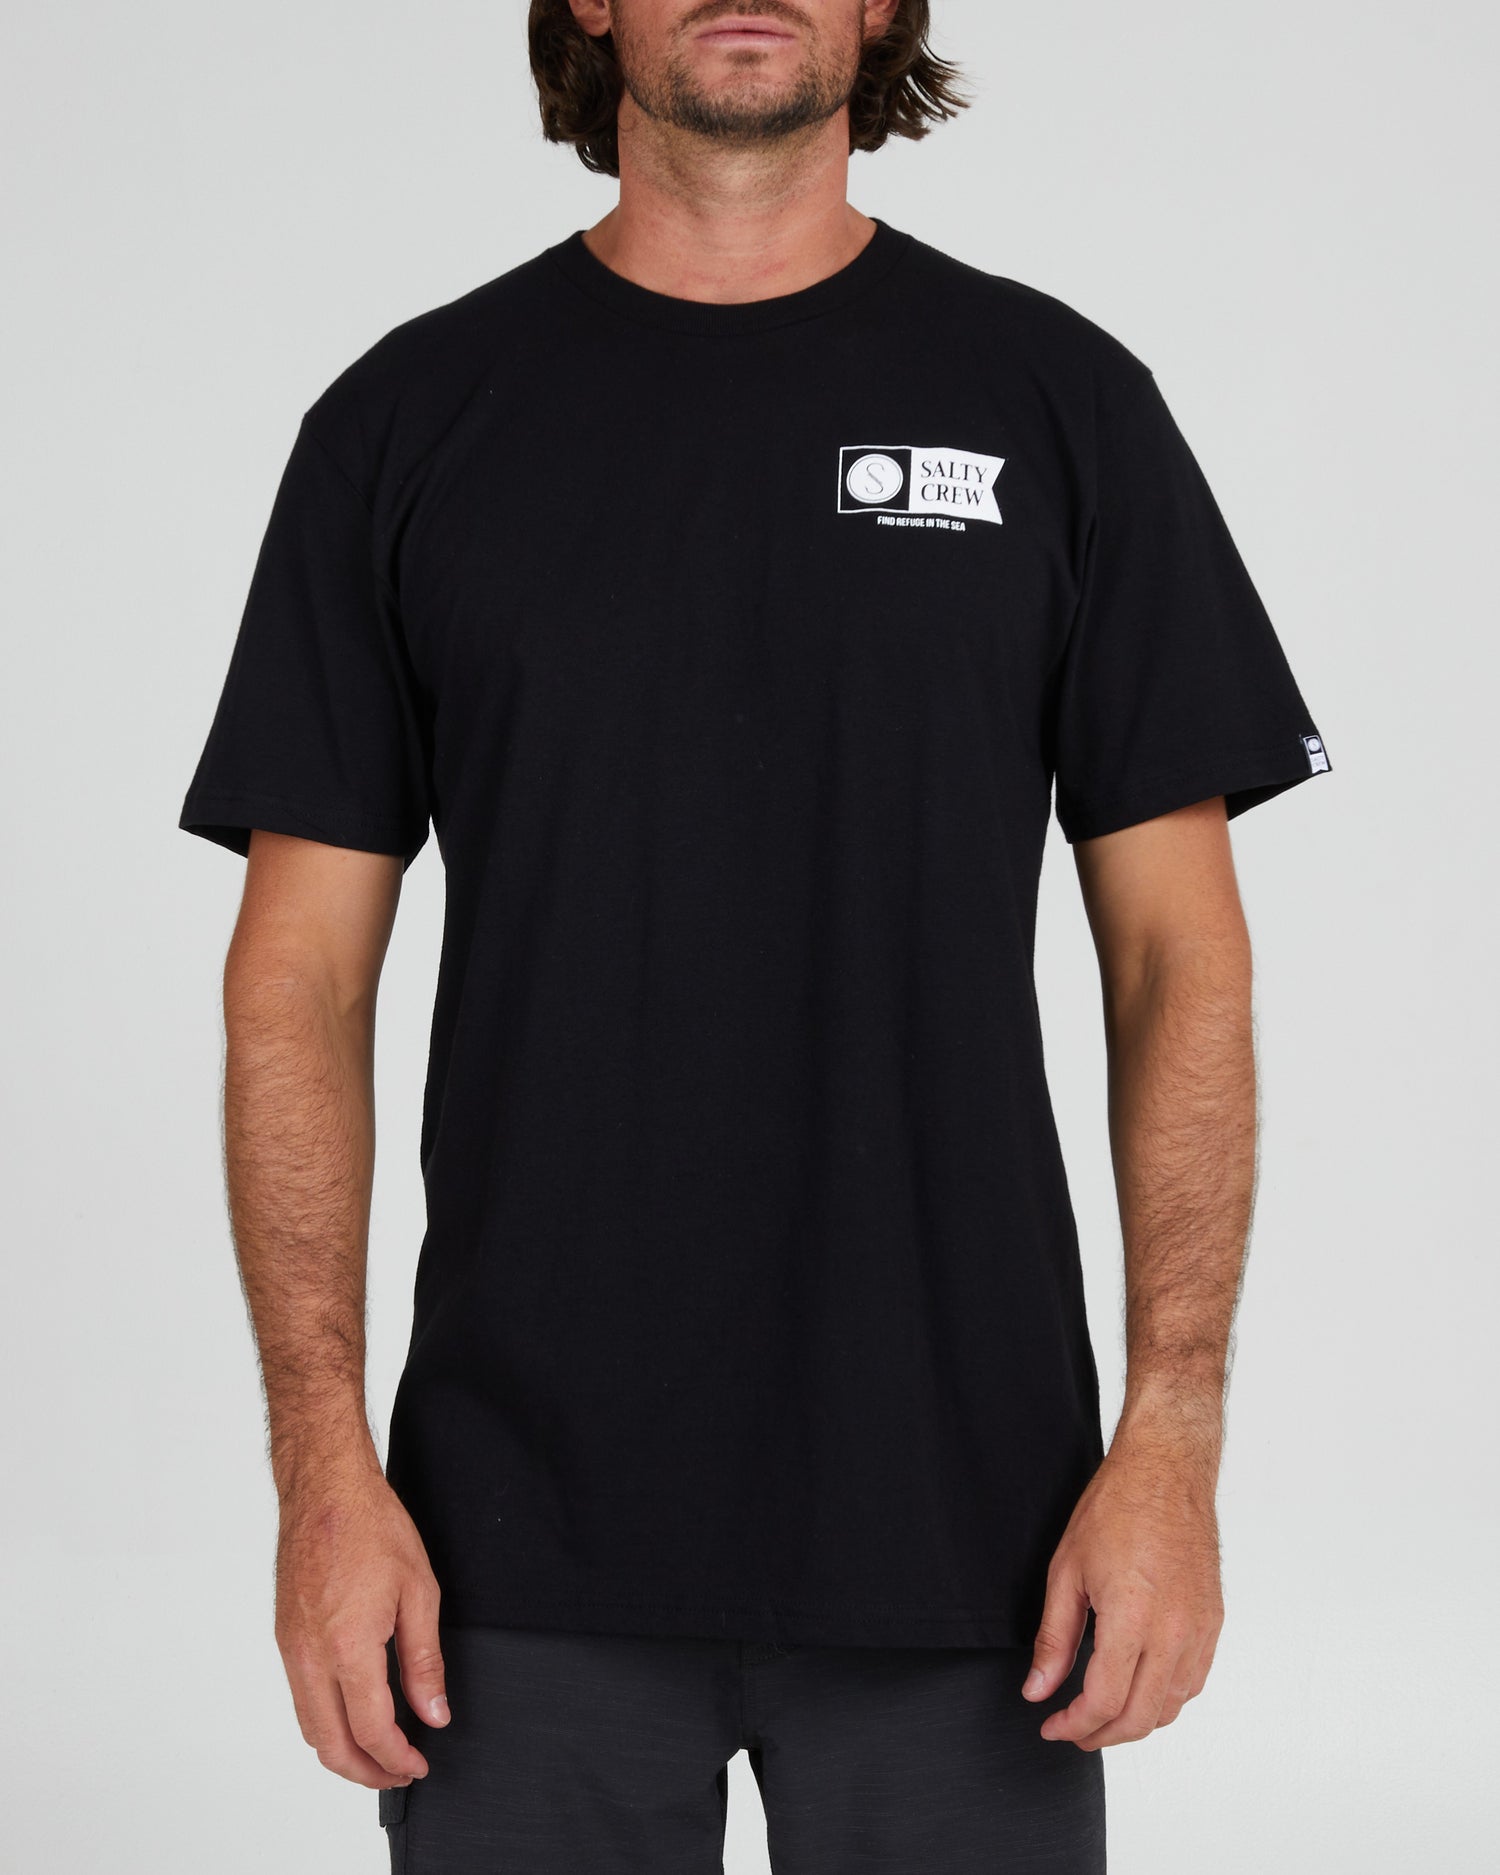 front view of Alpha Black S/S Tee